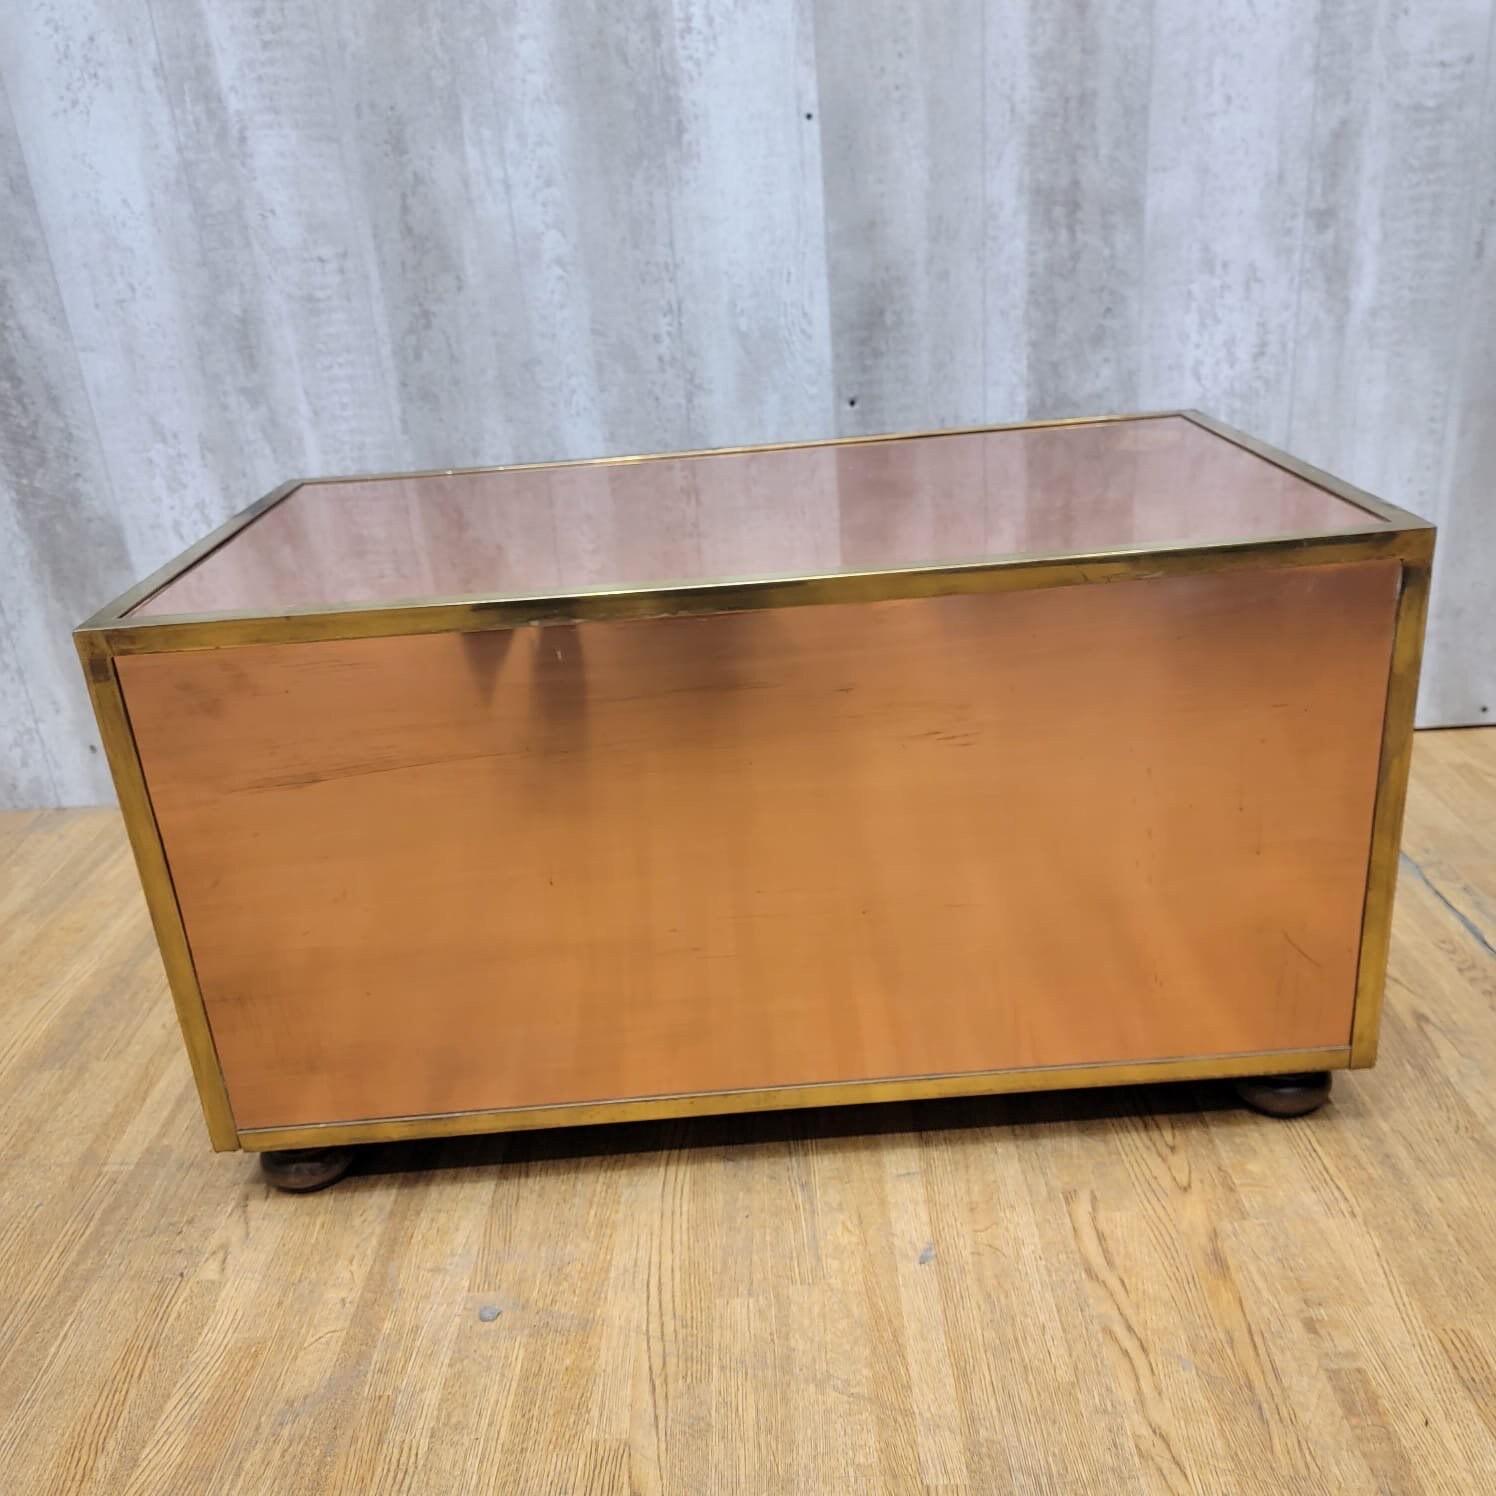 Vintage Copper Trunk Style Coffee Table with Leather Handles In Good Condition For Sale In Chicago, IL